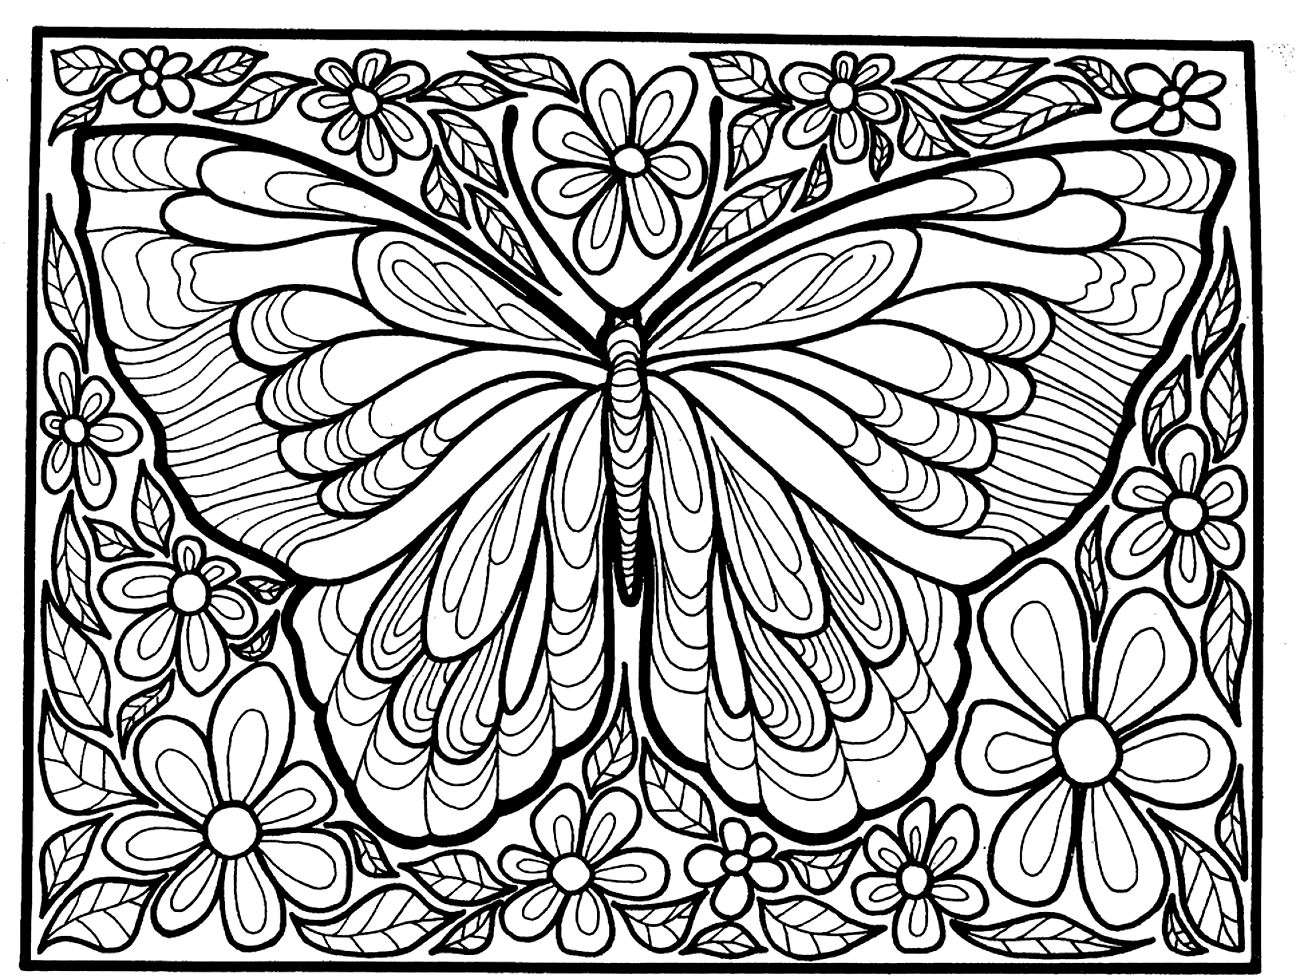 Big butterfly - Butterflies & insects Adult Coloring Pages